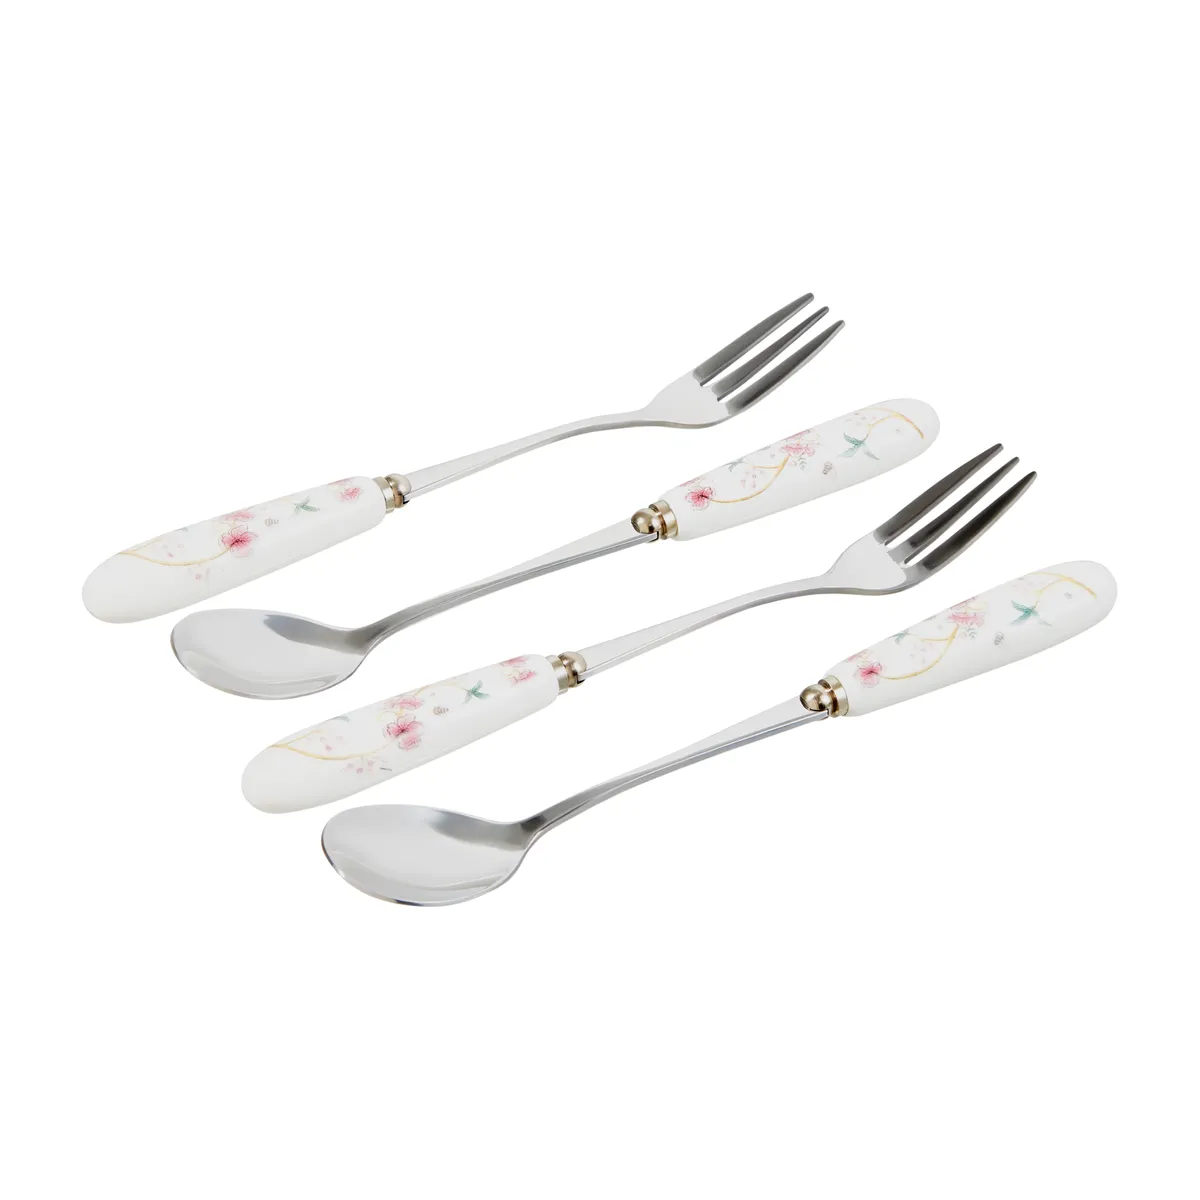 Escape to the Chateau cake forks, £12 for 4; Escape to the Chateau tea spoons, £12 for 4, both from Sainsbury's.